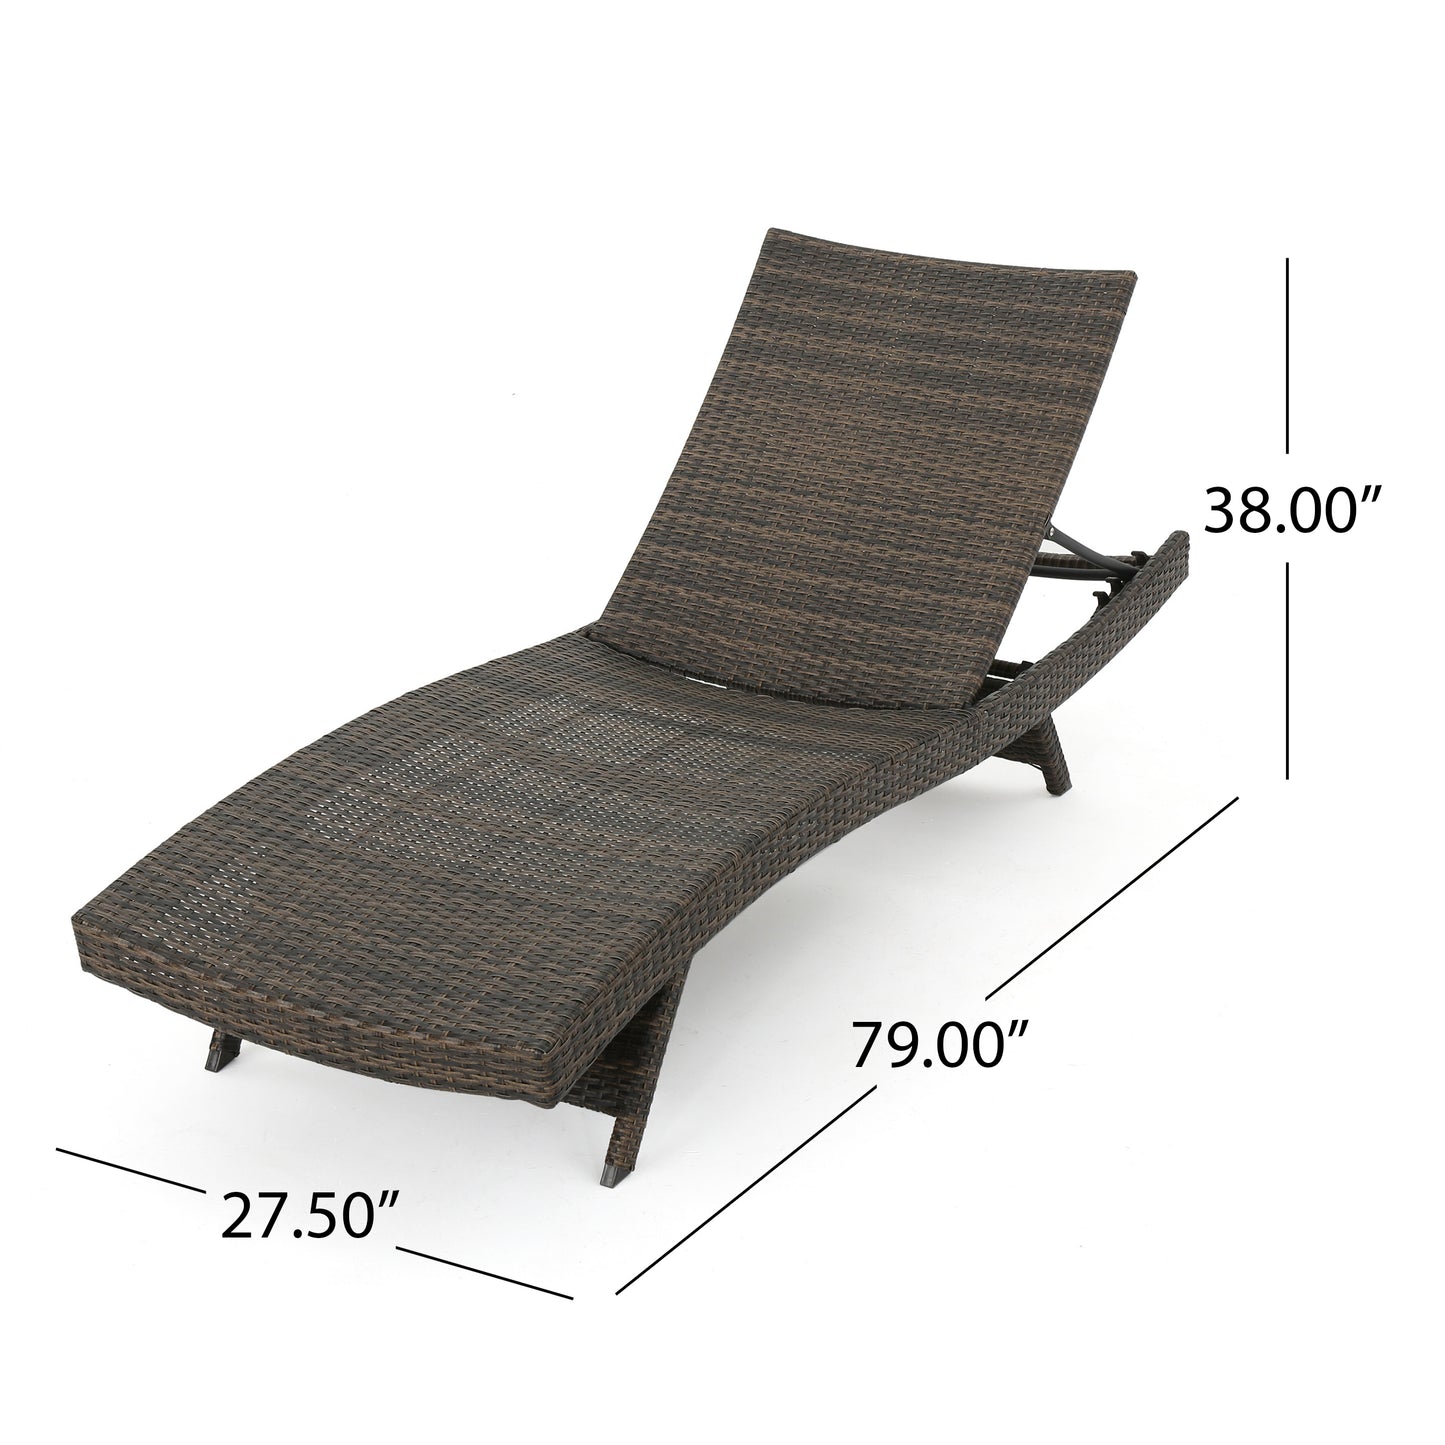 Samulle Outdoor 3 Piece Mixed Mocha Wicker Armless Chaise Lounge and Table Set